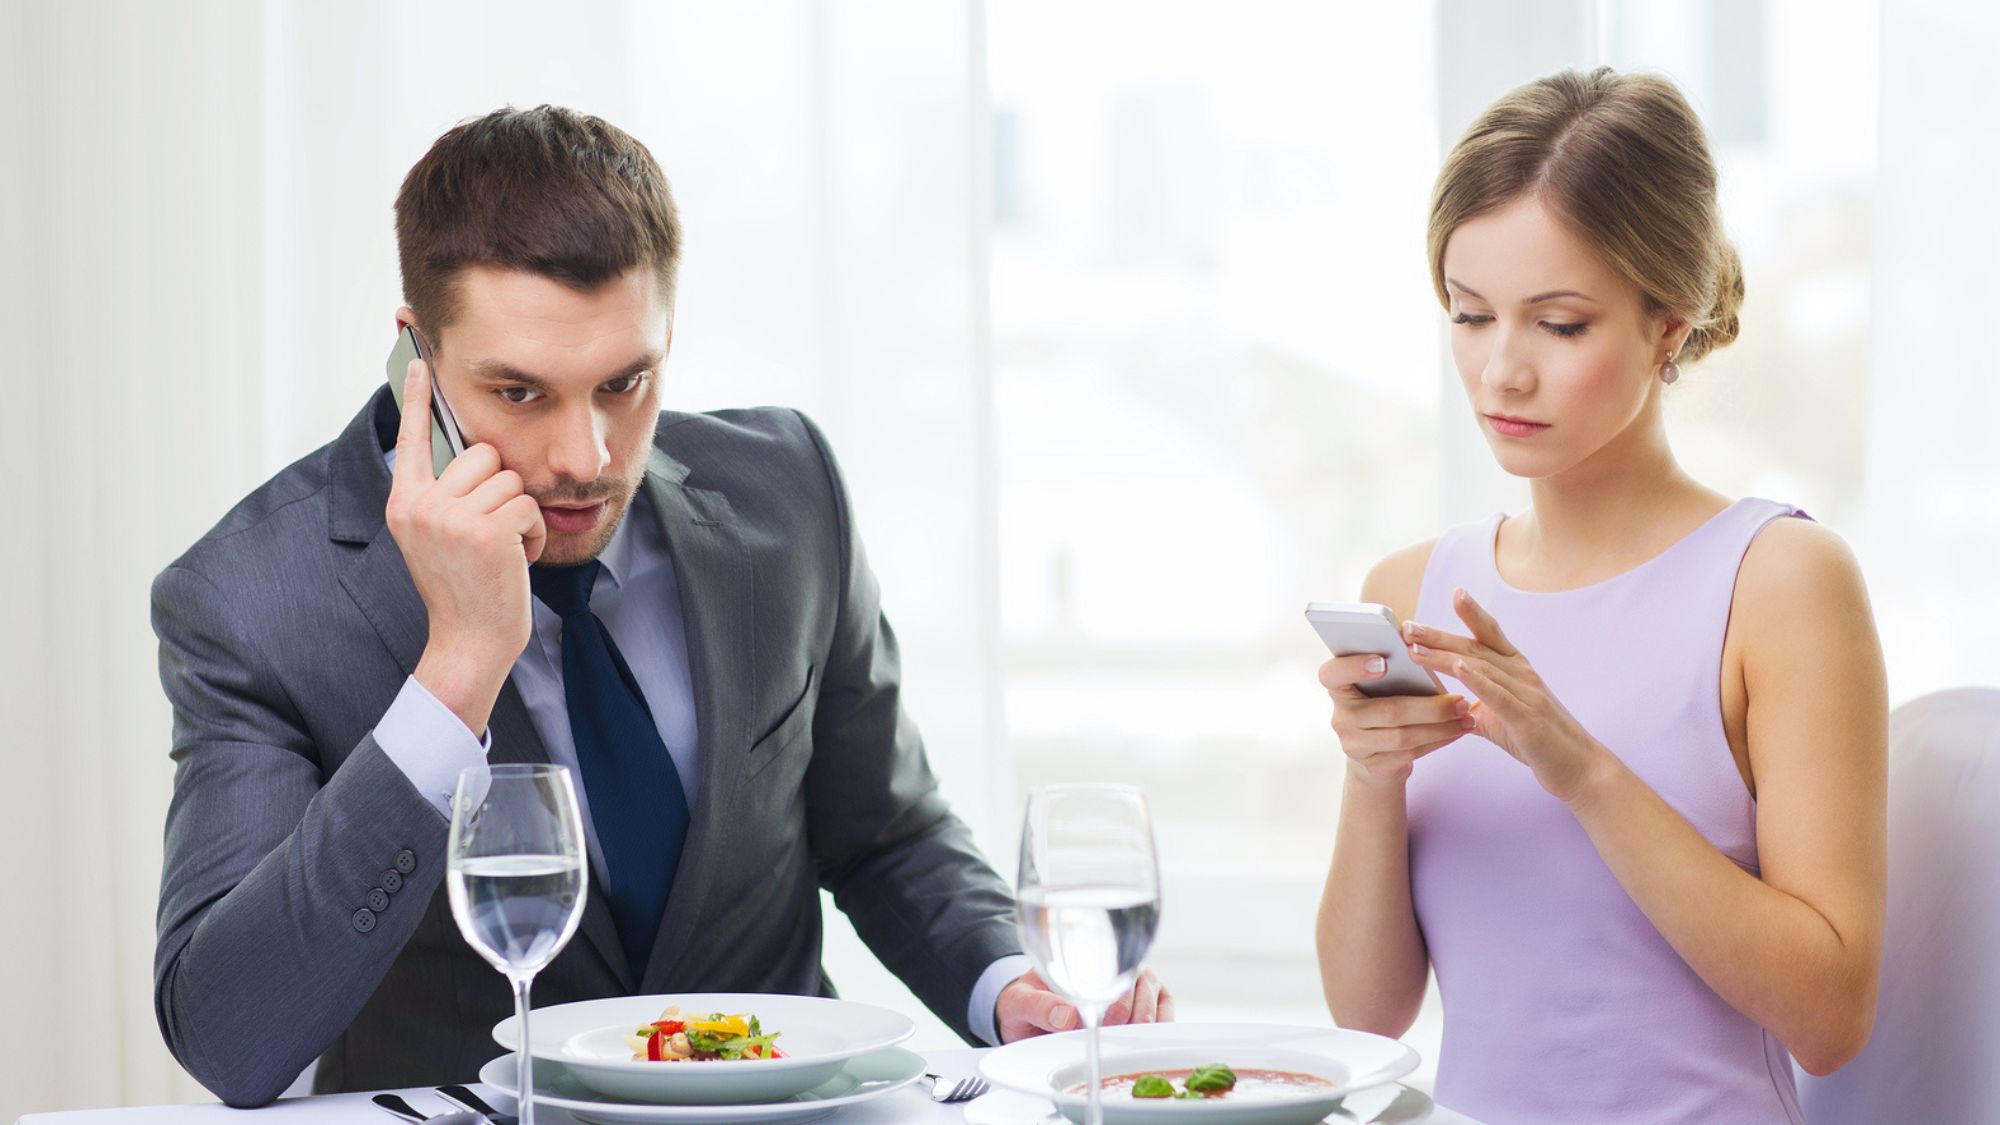 A couple using phones showcasing dining experience & restaurant etiquette's importance